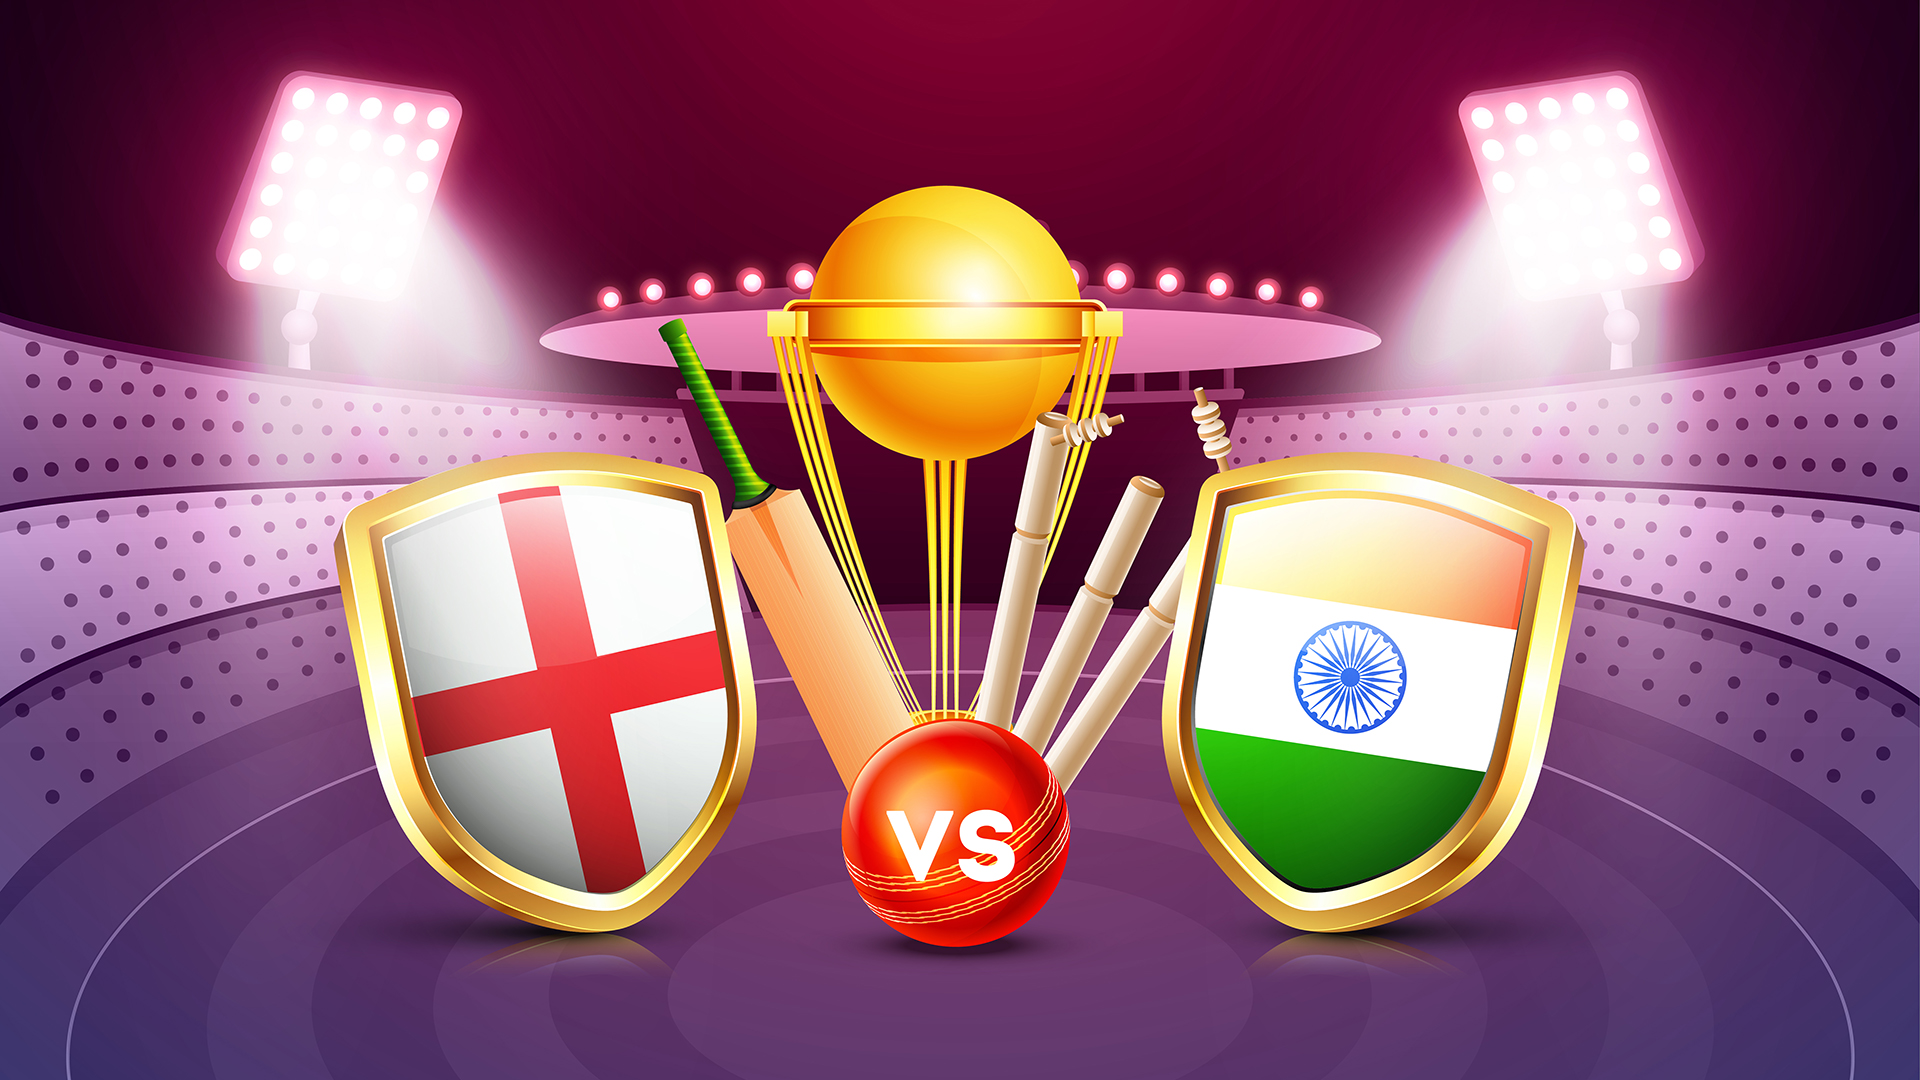 India vs England T20 watch online How to watch T20 cricket live online anywhere Toms Guide